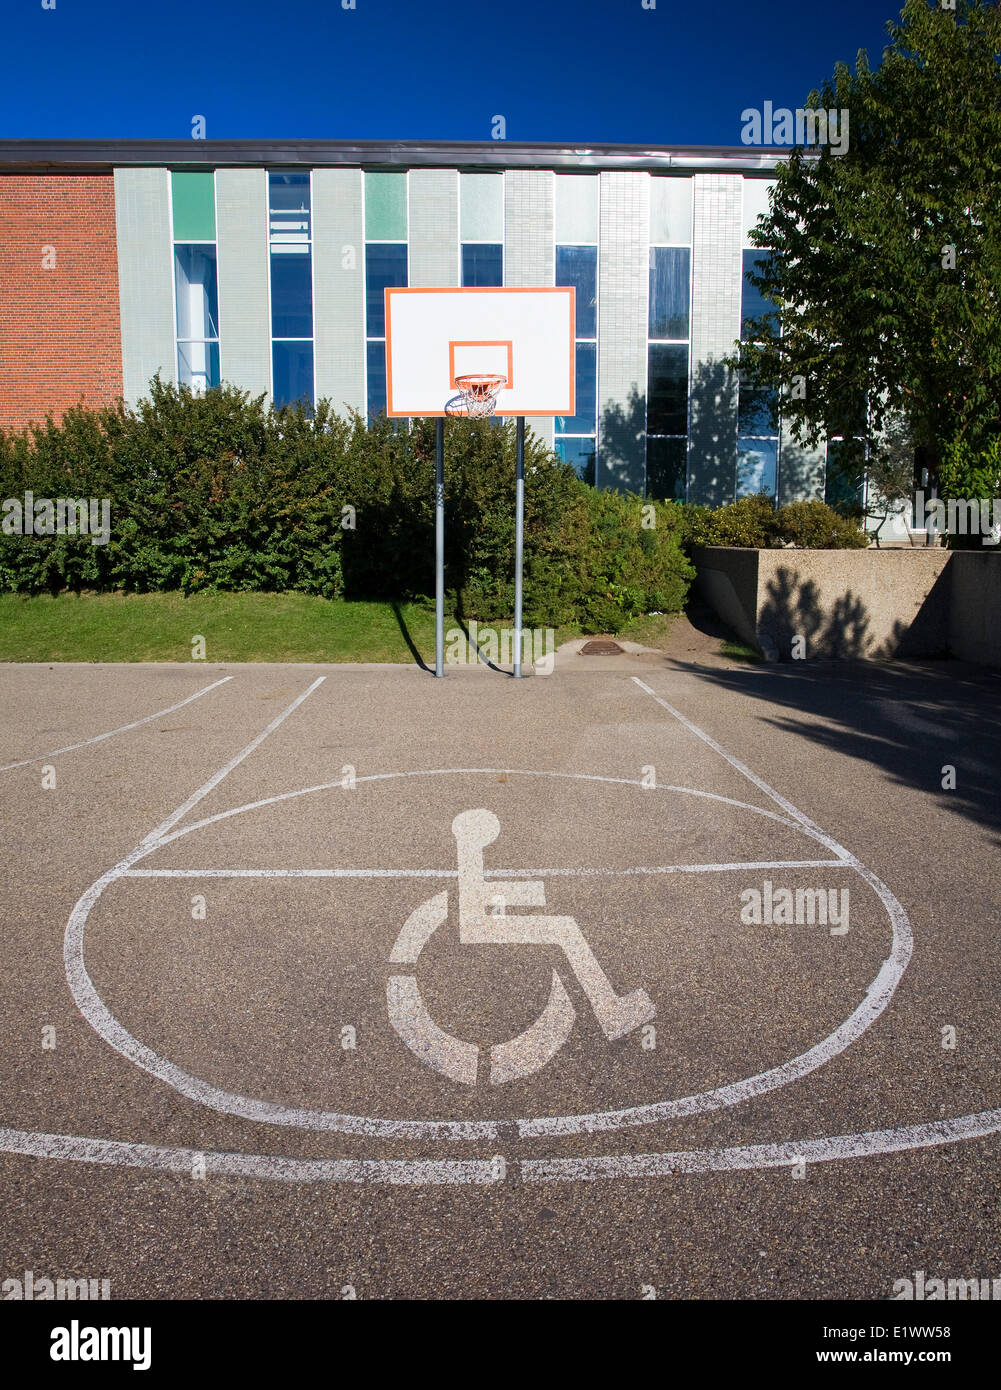 Basketball court with handicap symbol superimposed on court. Stock Photo